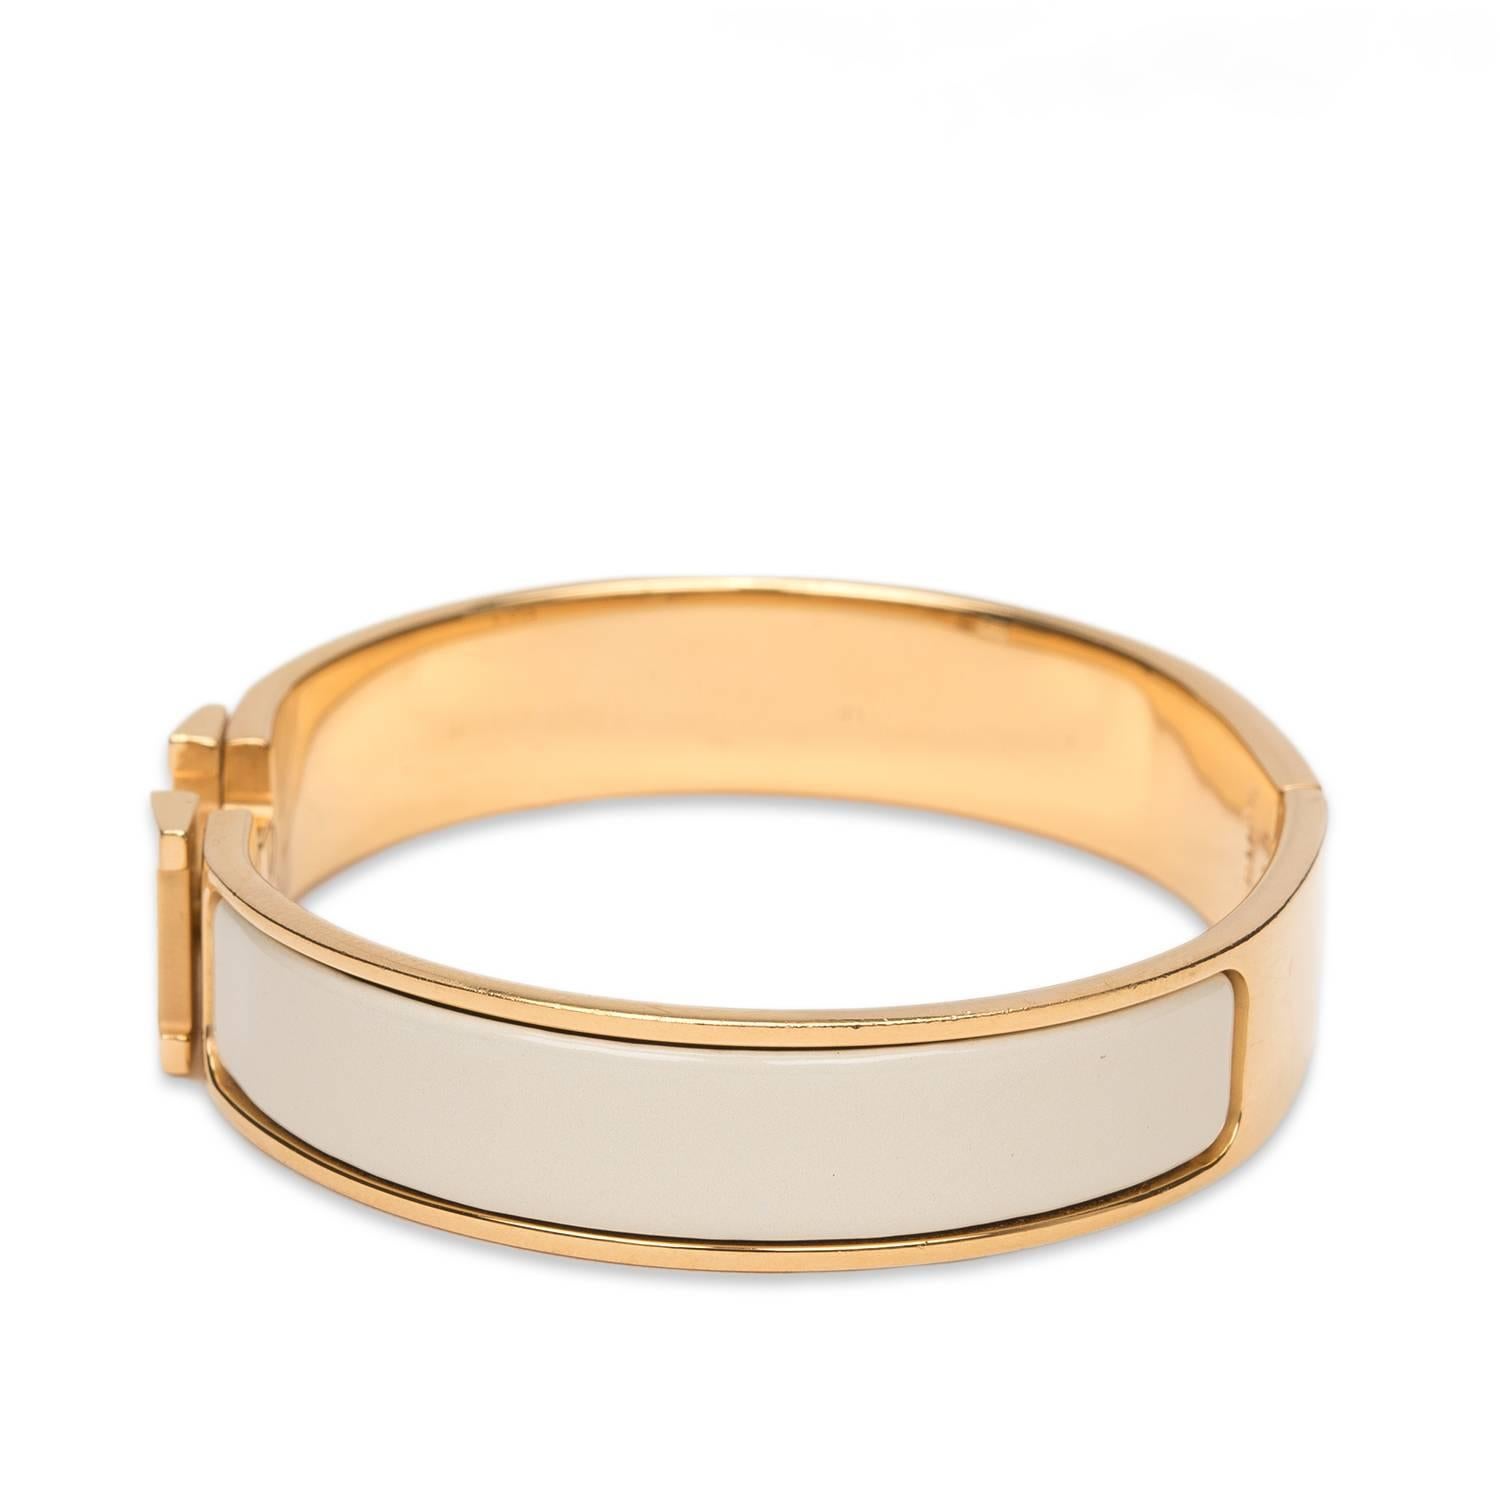 Hermes narrow Clic Clac H bracelet in Craie enamel with gold plated hardware in size PM.

Origin: France

Condition: Excellent

Accompanied by: Hermes box

Measurements: Diameter: 2.25